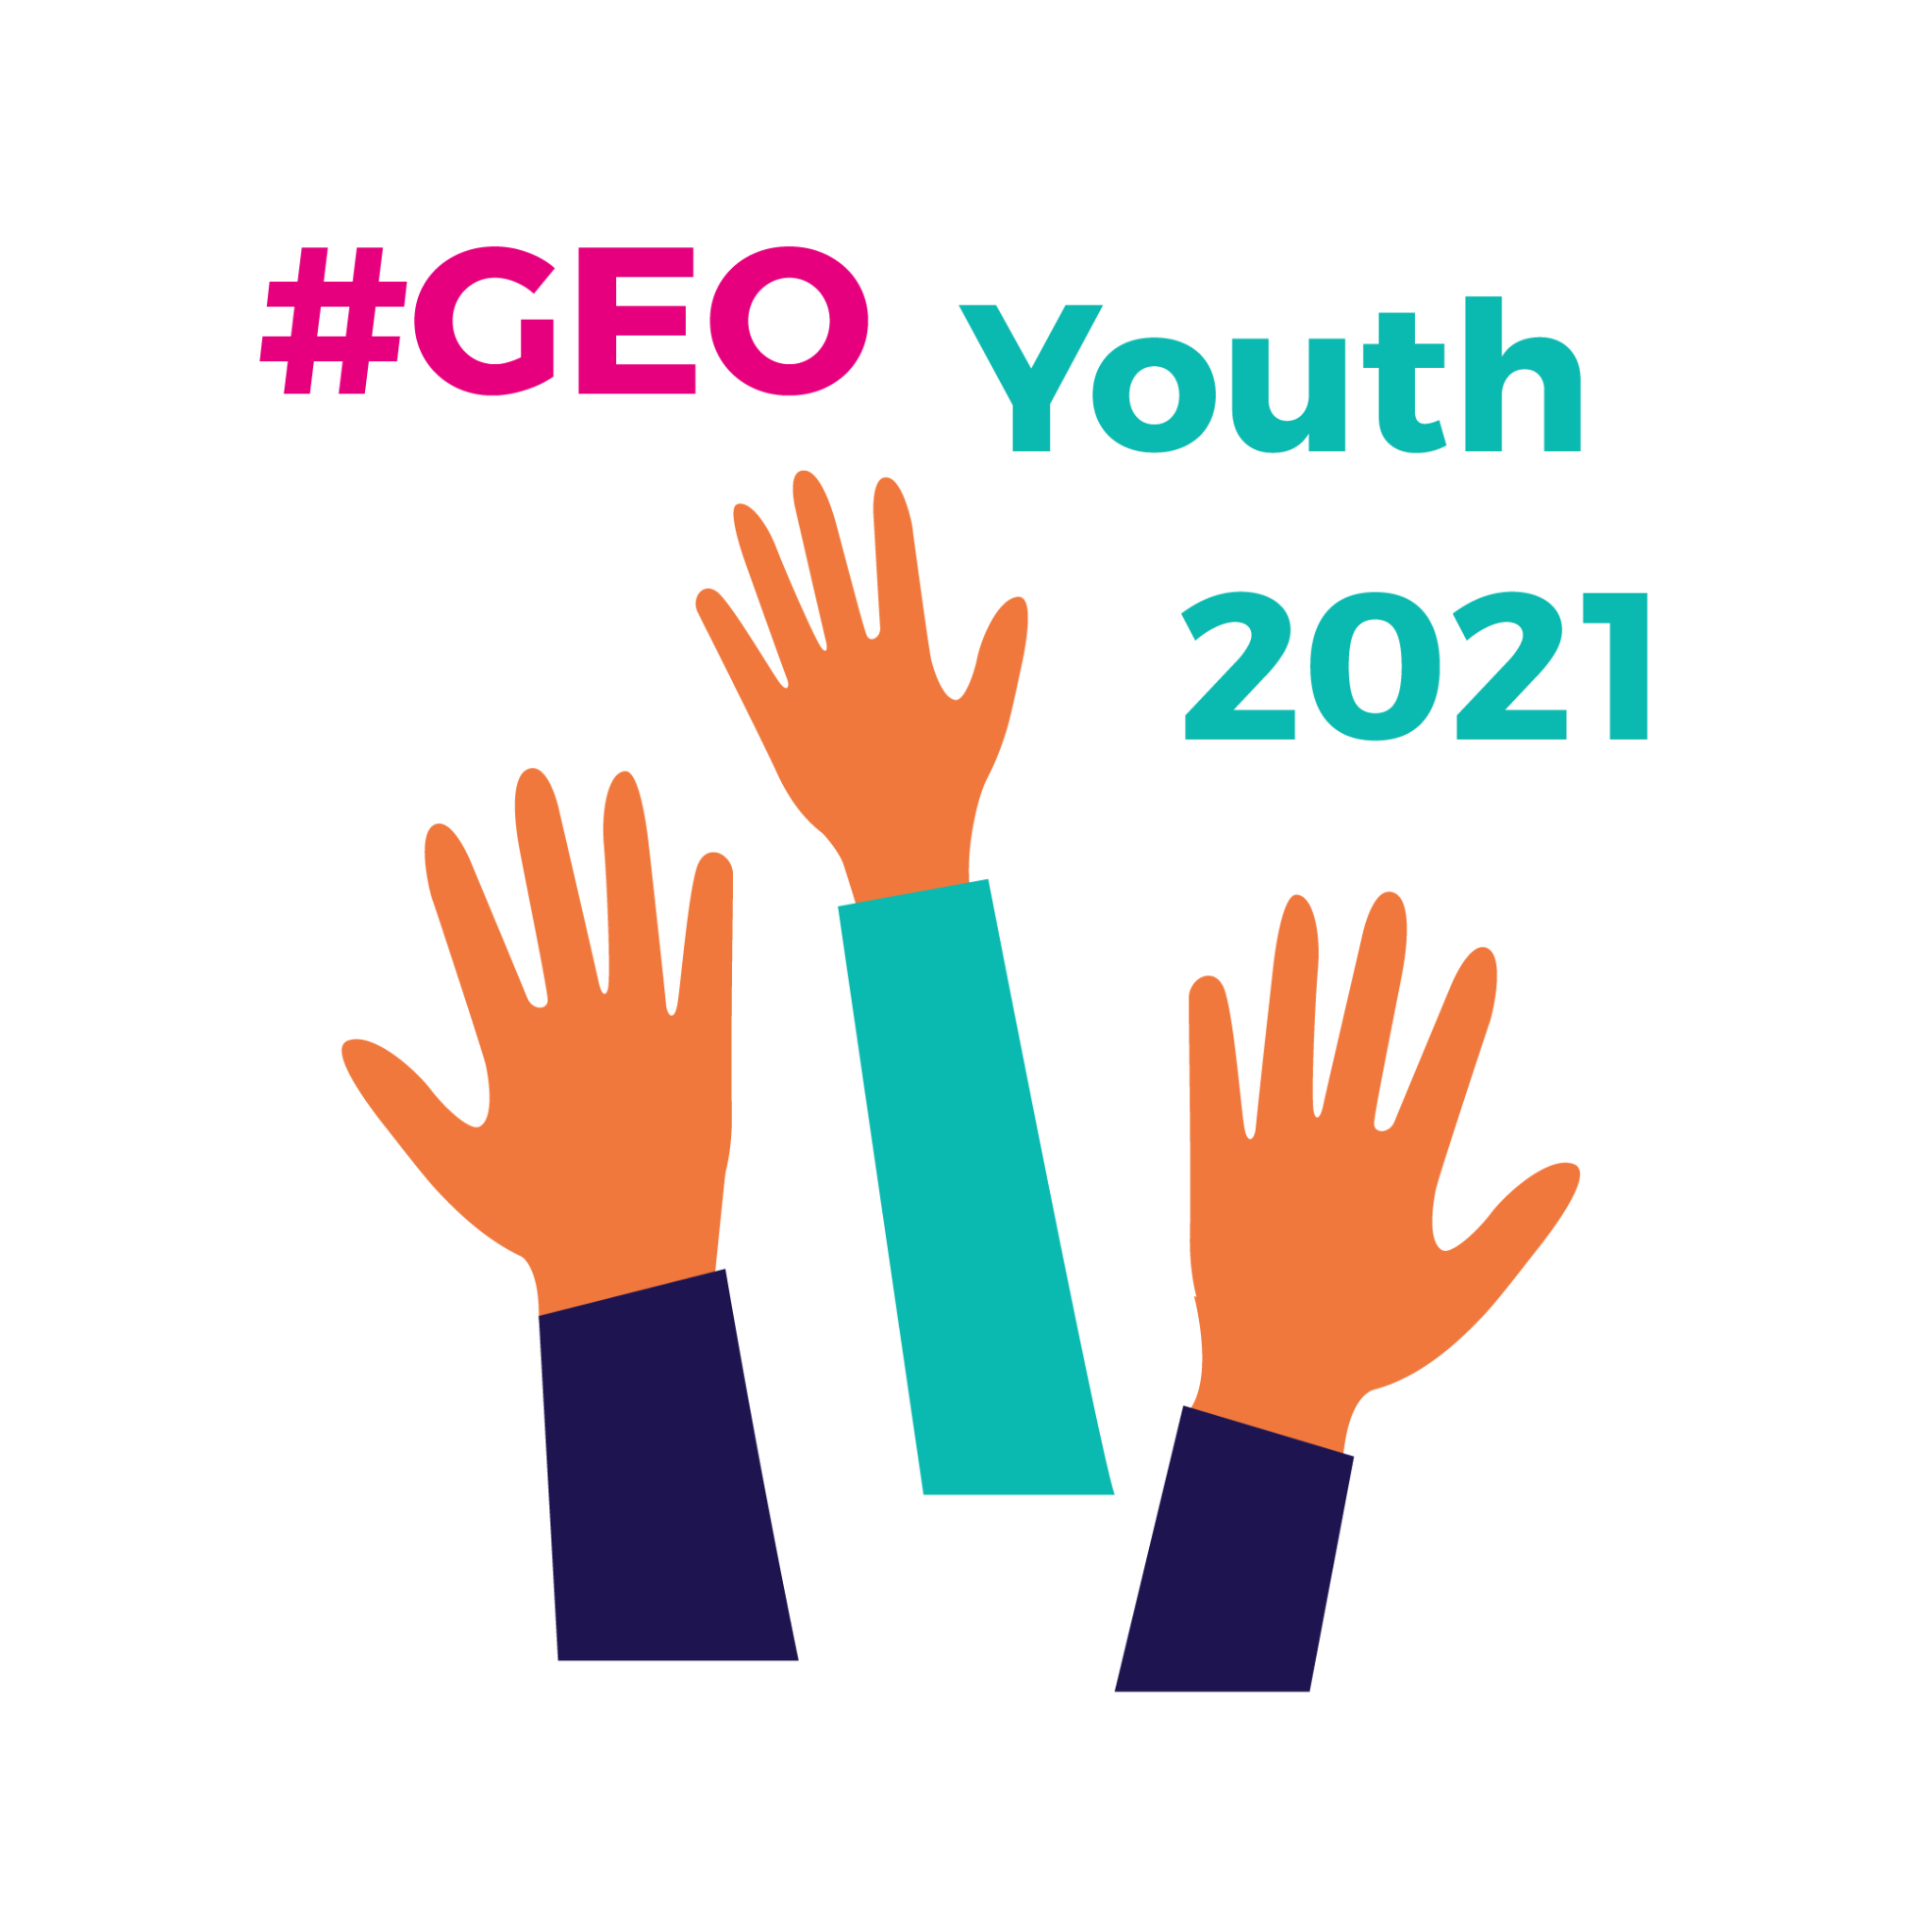 GEOYOUTH2021 - Fostering youth participation in local politics